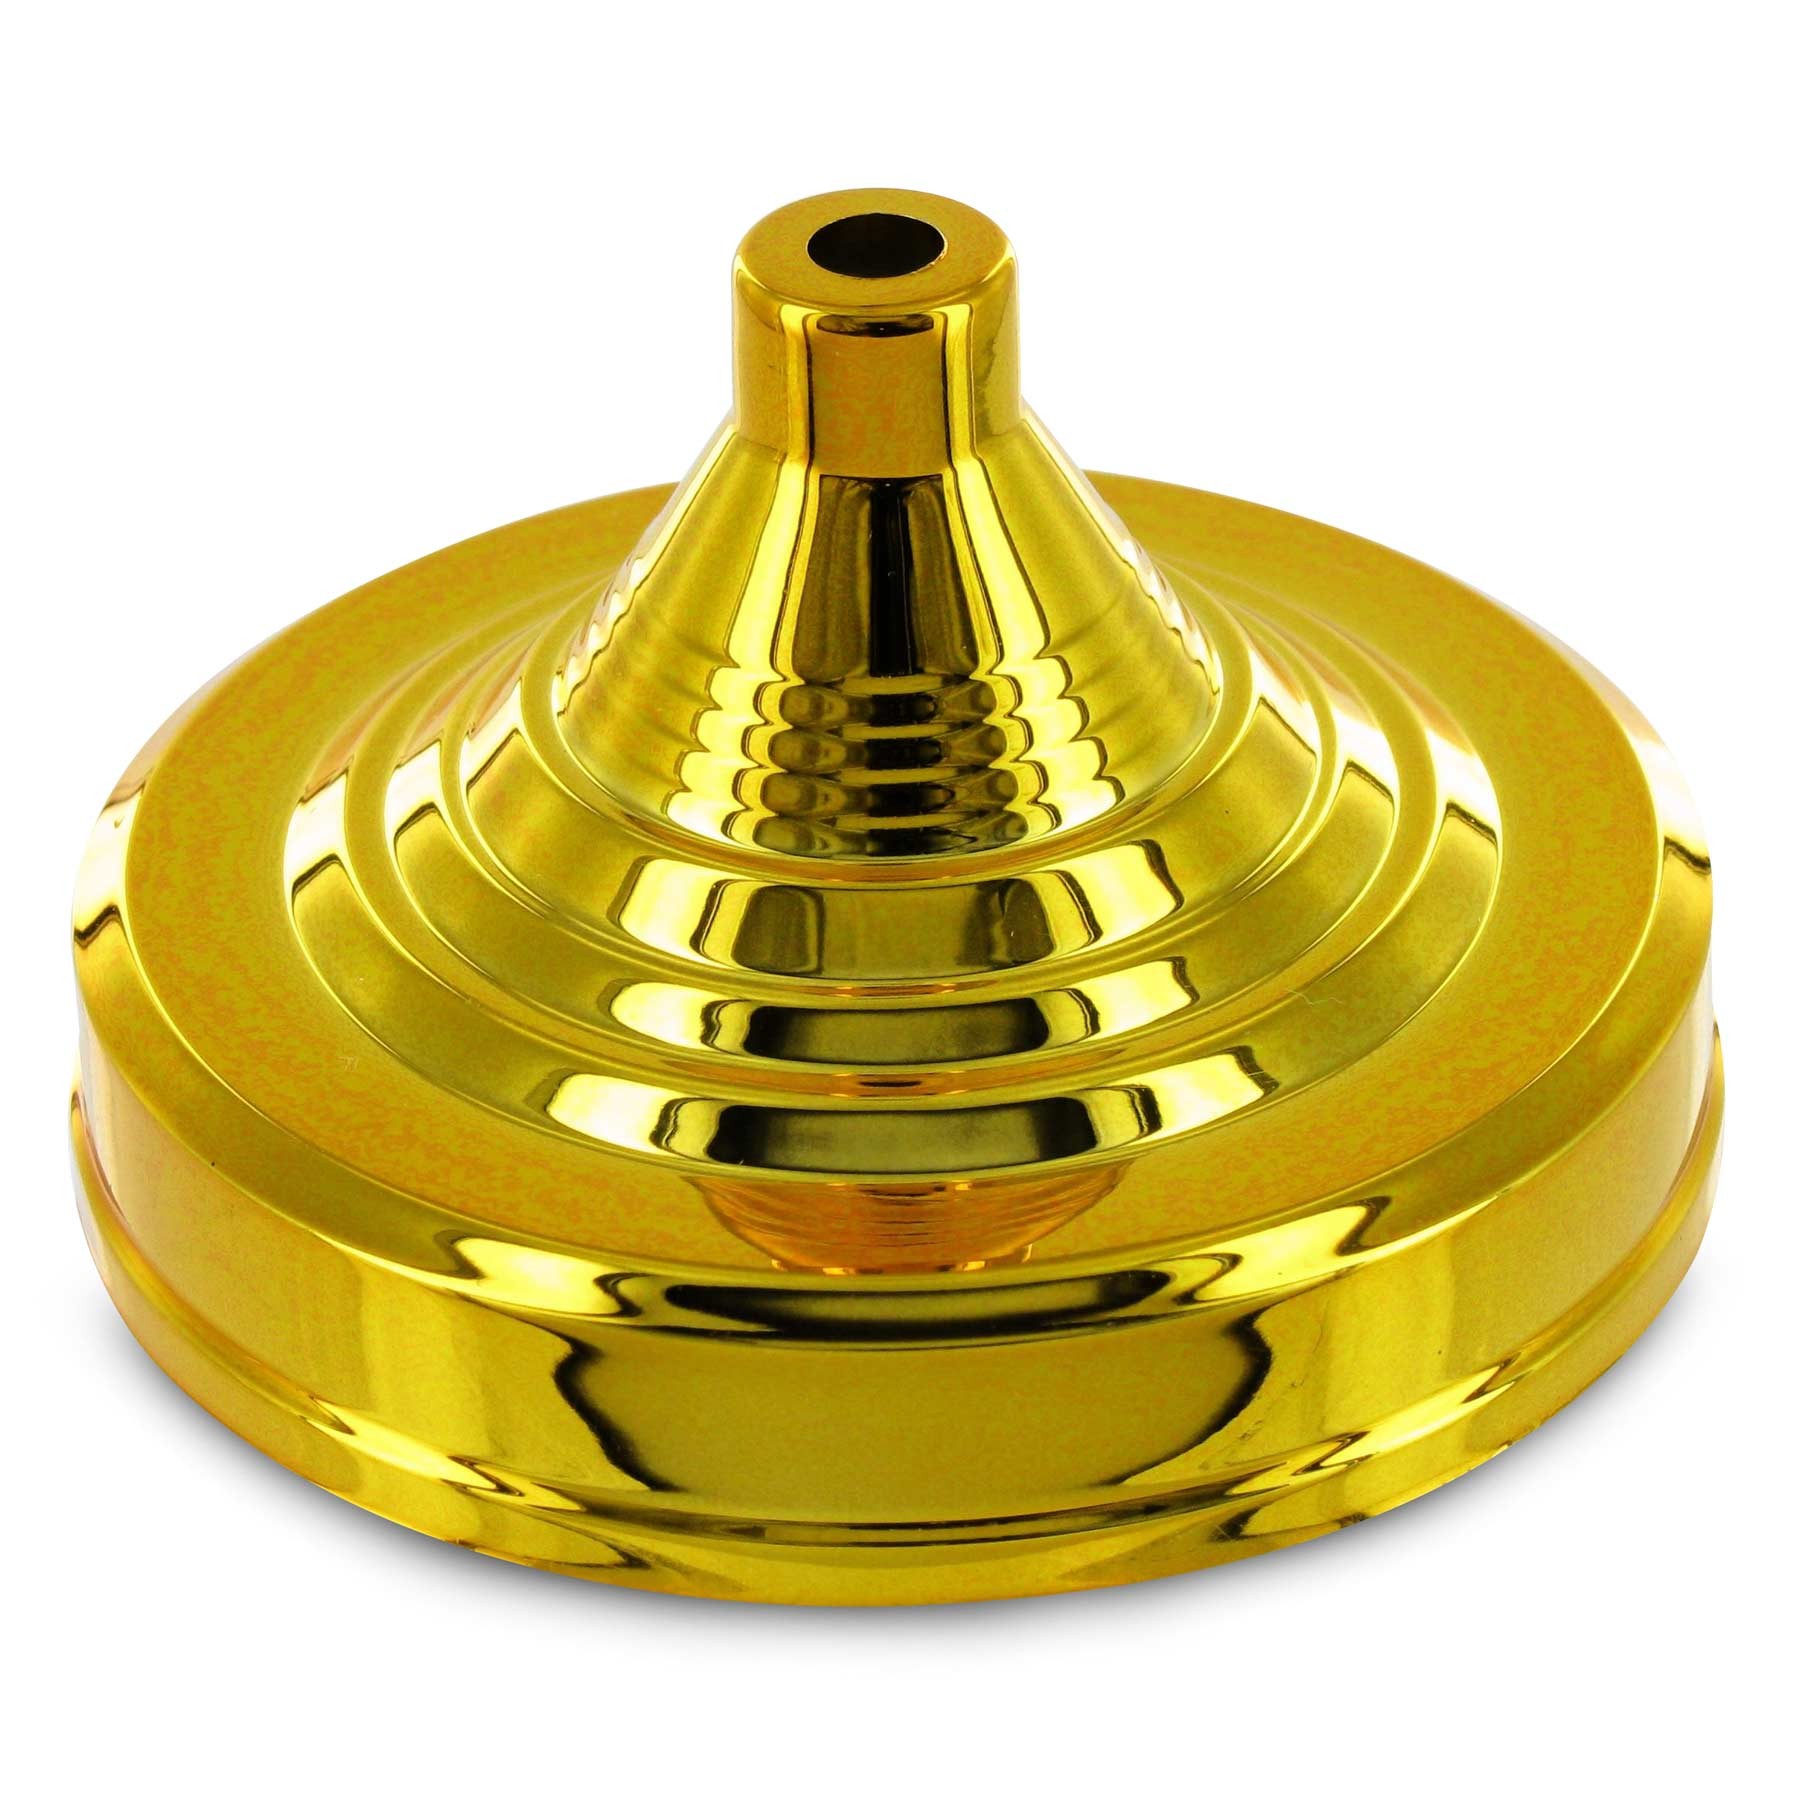 Weighted, tall gold plastic base for one 4x6" flag - Weighted, tall gold styrene plastic base for one 4x6" flag